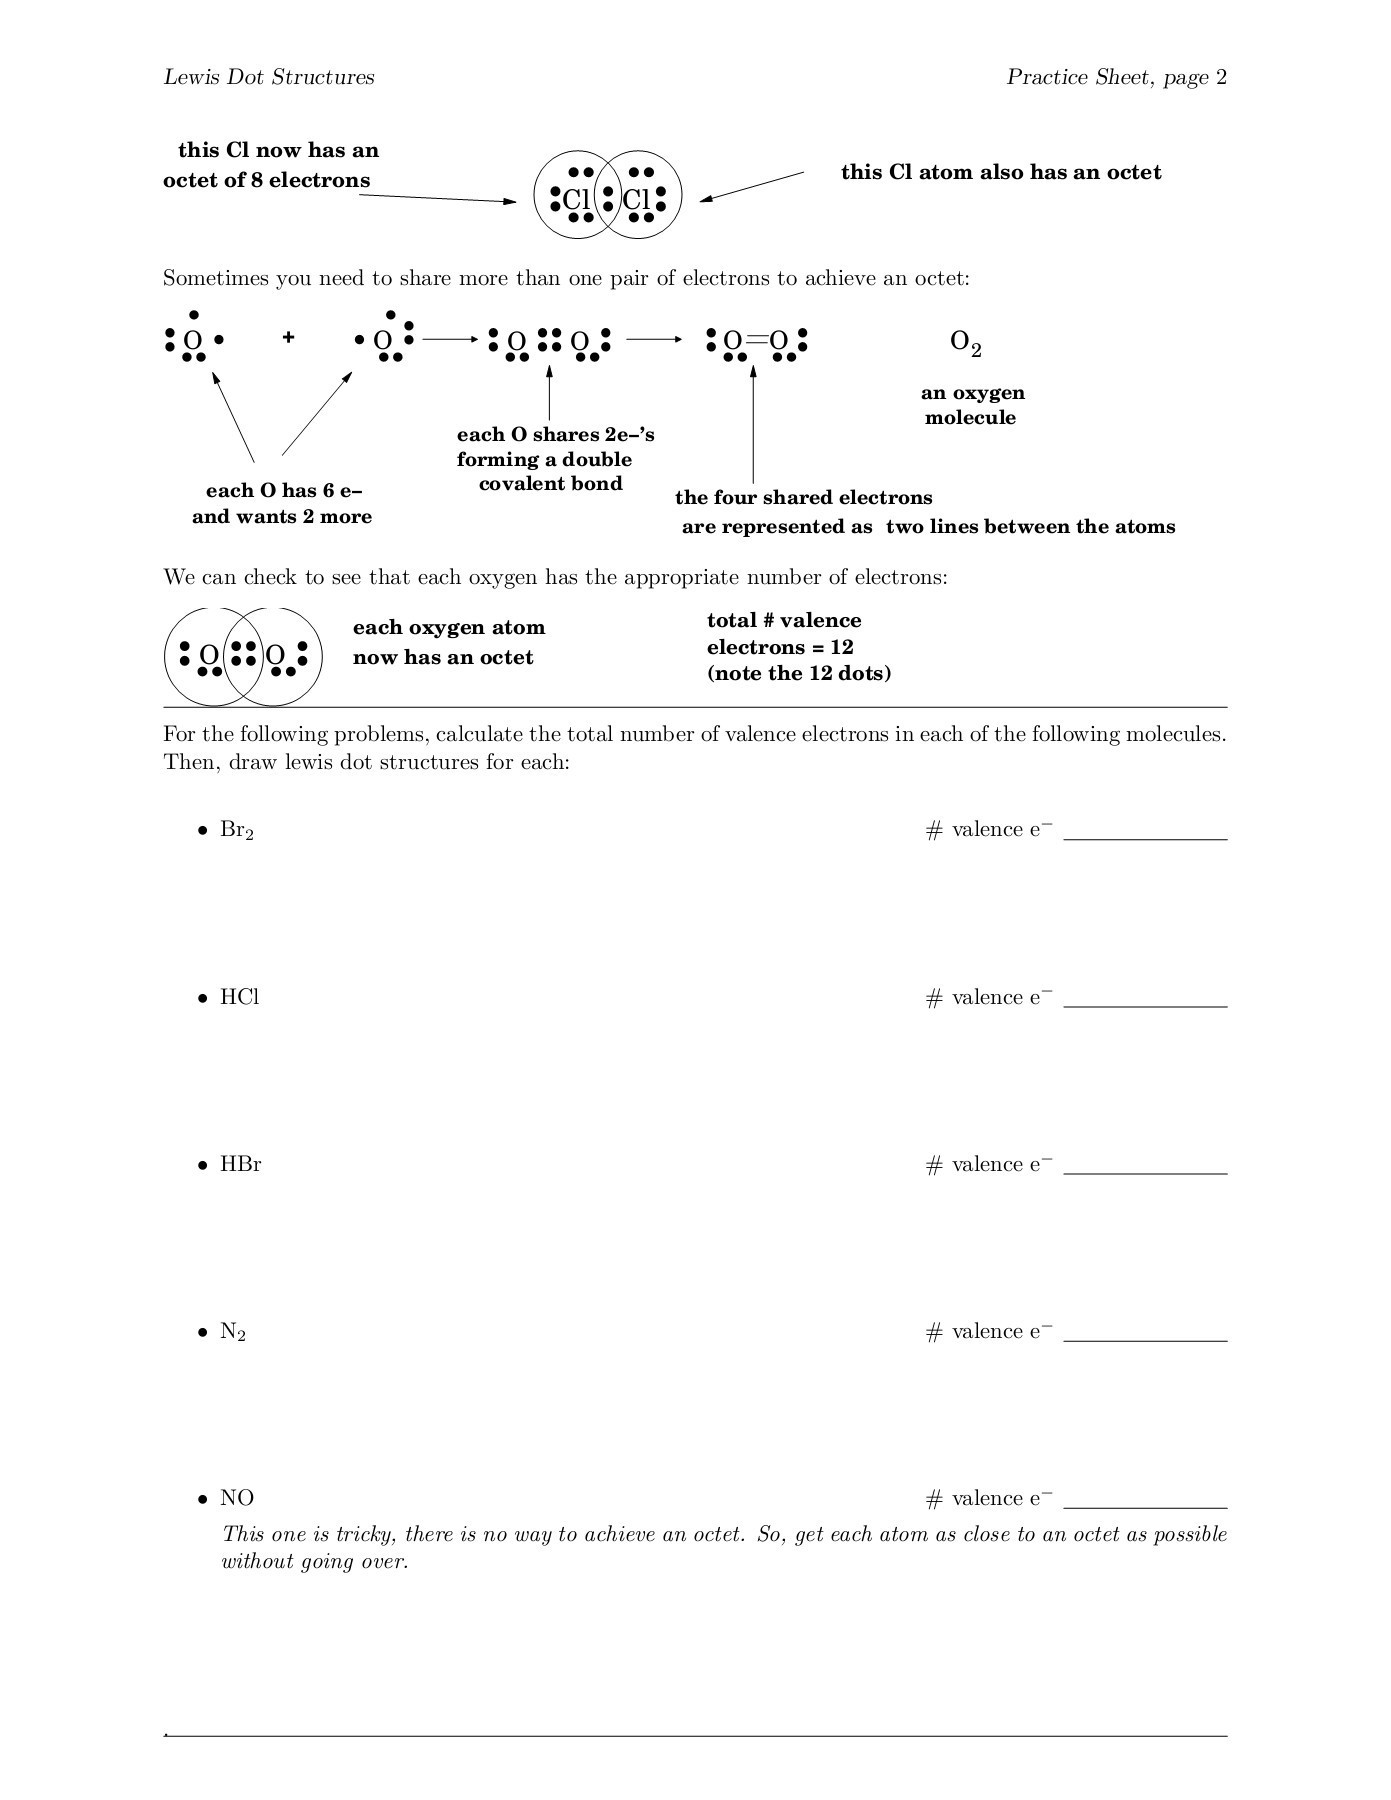 Lewis Structures Worksheet with Answers Electron Dot Lewis Structures Pages 1 4 Text Version